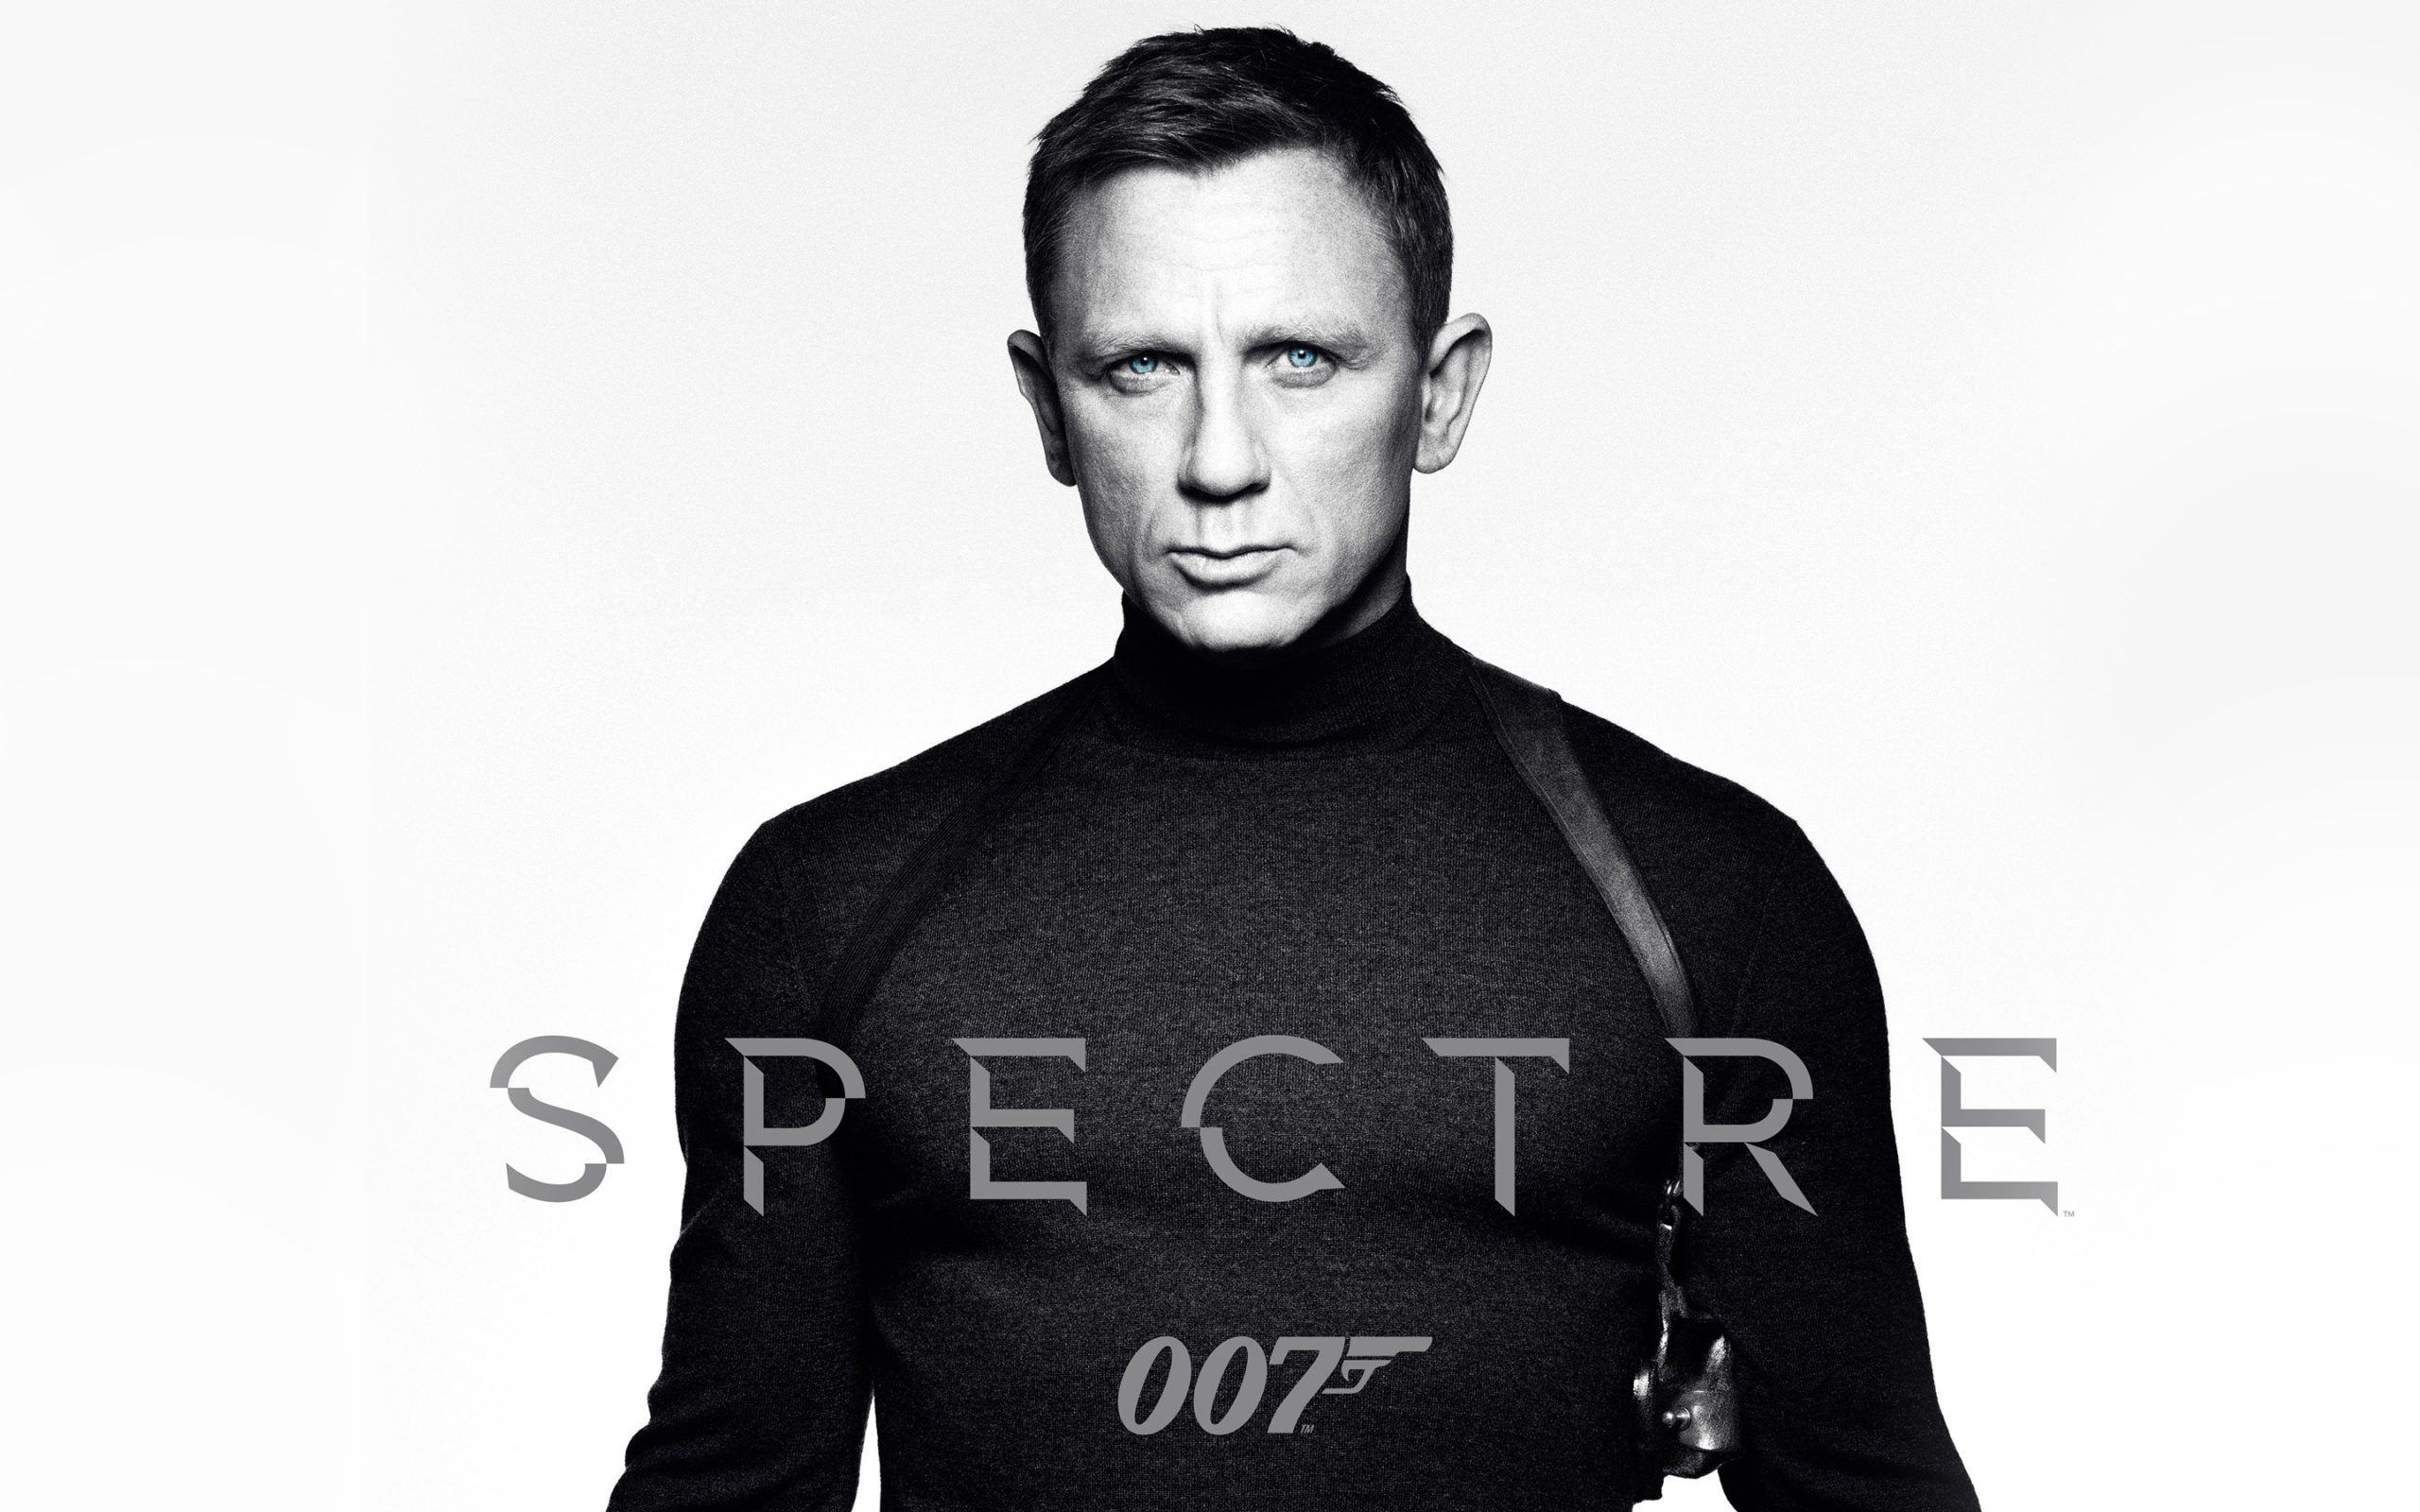 James Bond: Is This Singer Performing SPECTRE's Theme Song?